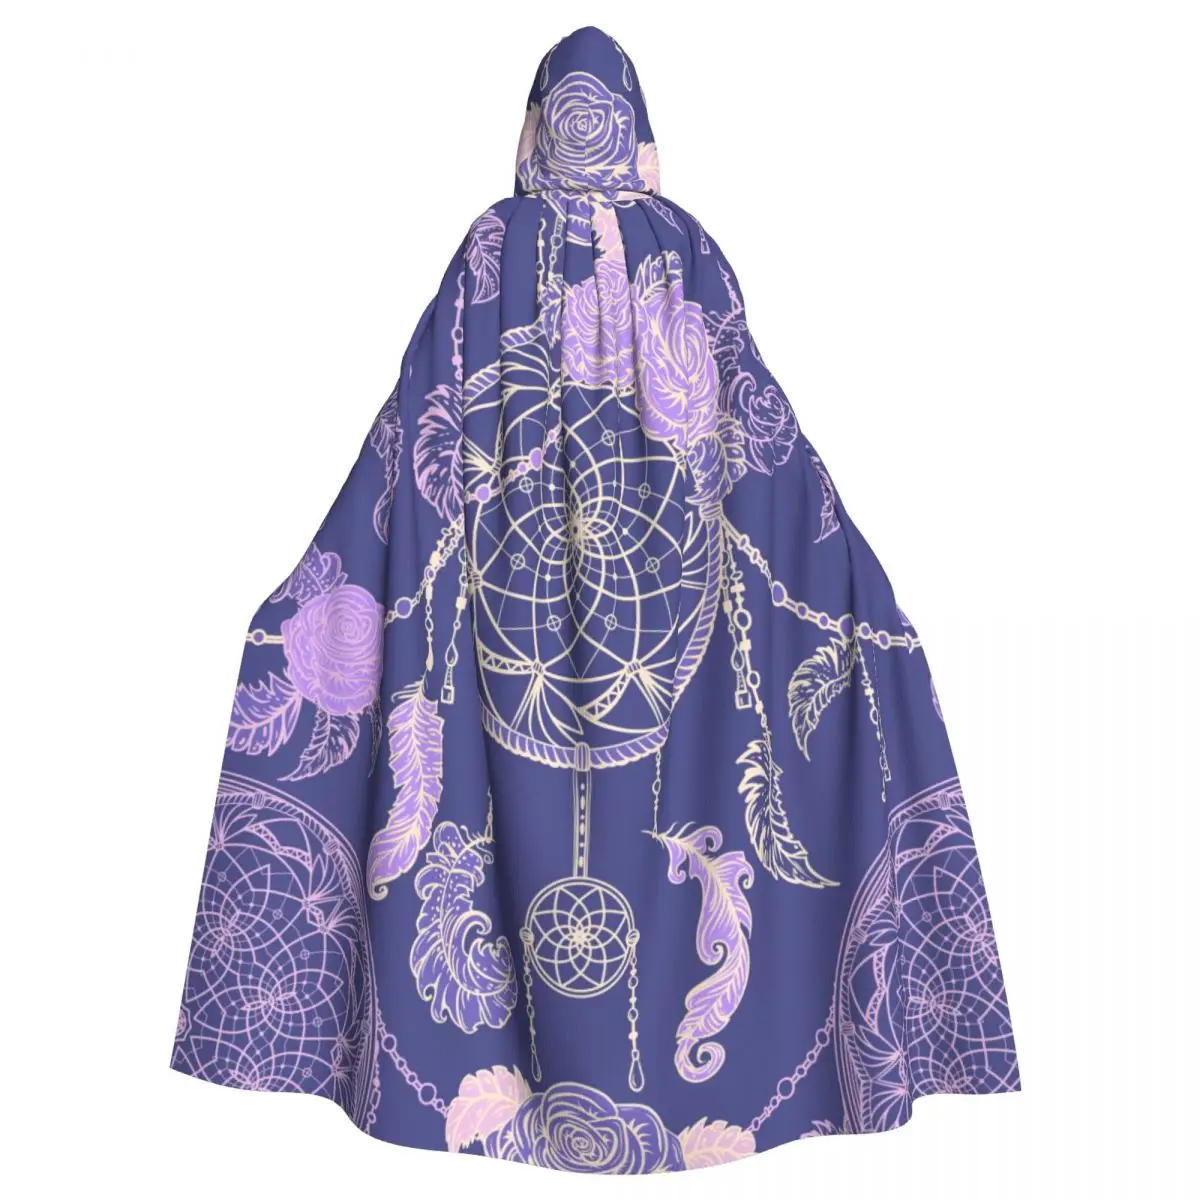 

Long Cape Cloak Pattern With Dream Catcher Roses Leaves And Feathers Hooded Cloak Coat Autumn Hoodies